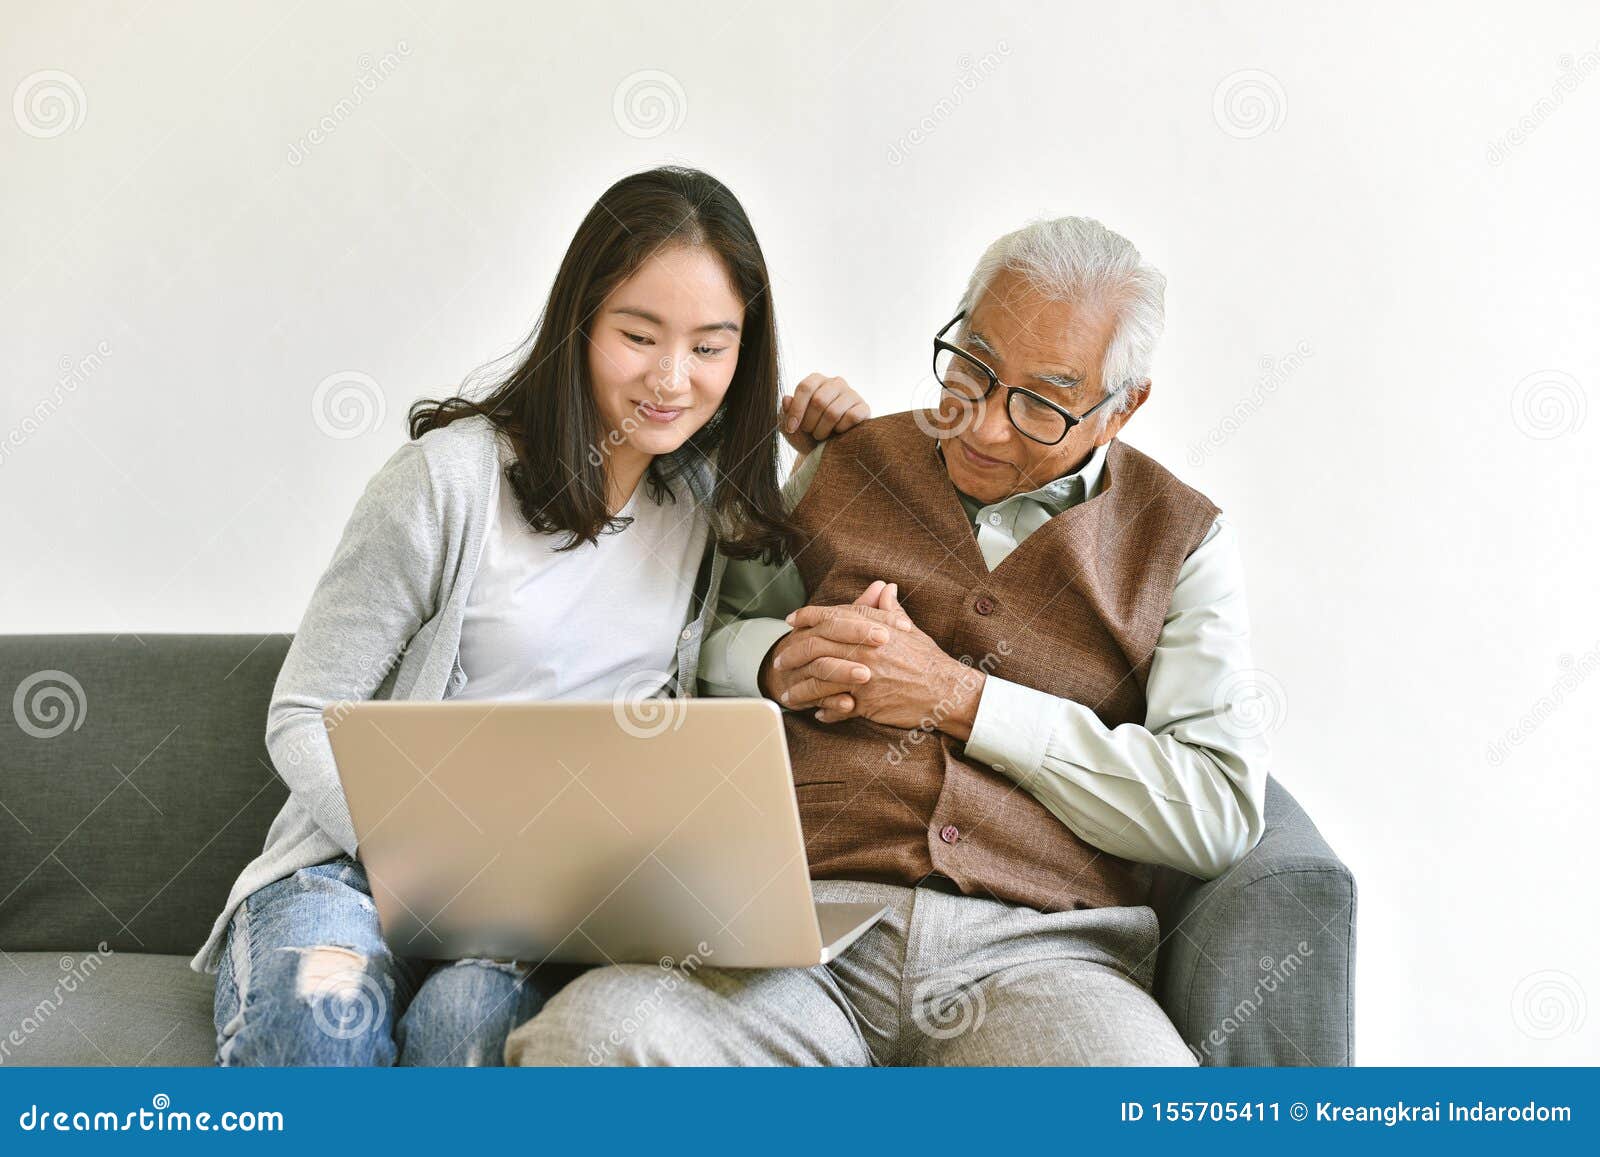 daughter and elderly father using laptop computer together, senior people spend time learning to use social media and digital.